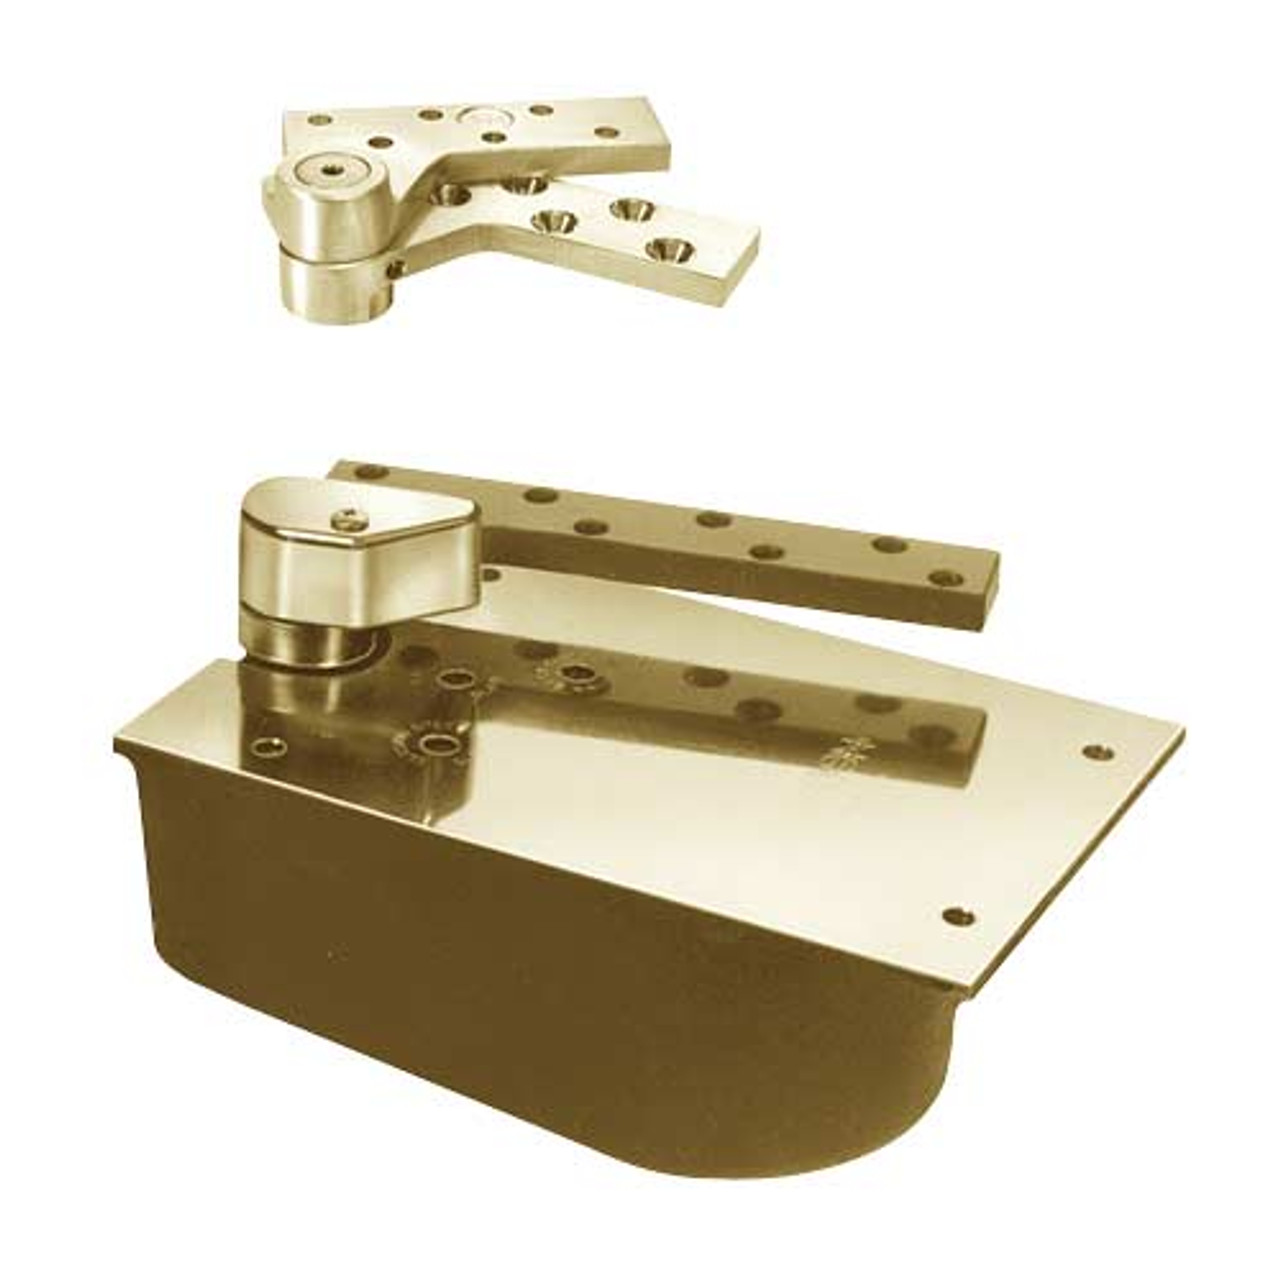 L27-85S-LTP-LH-2-1/4-606 Rixson 27 Series Extra Heavy Duty Lead Lined Offset Floor Closer in Satin Brass Finish